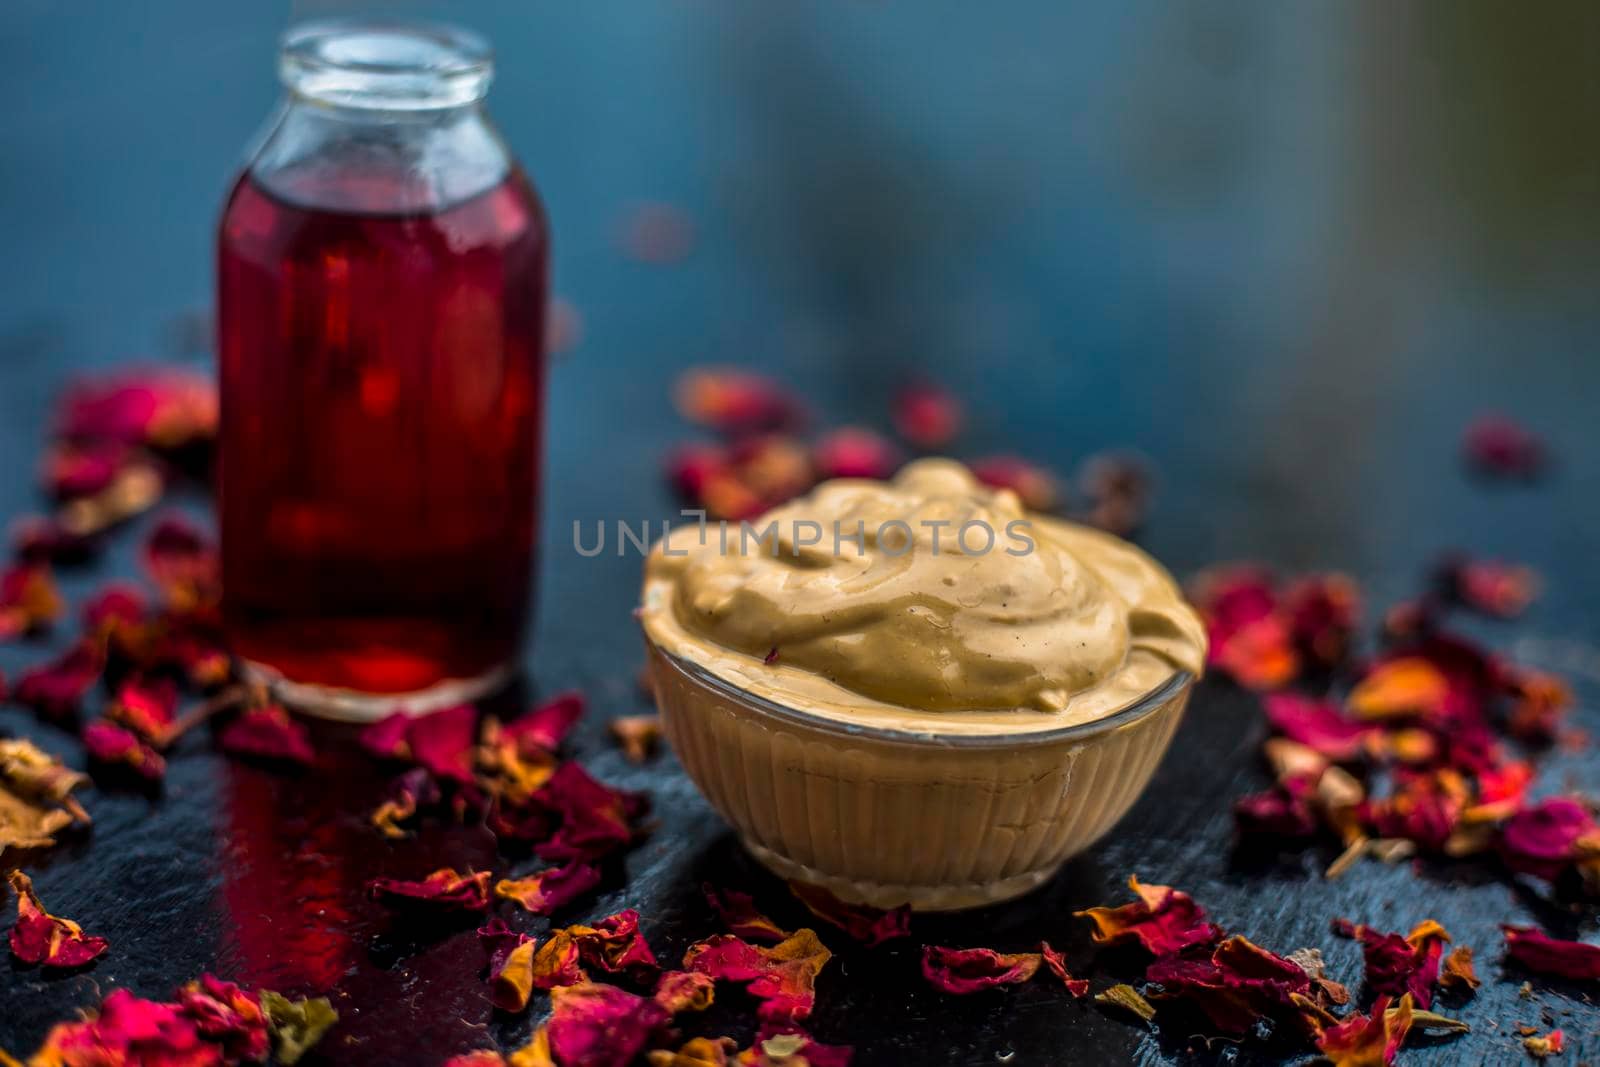 Ubtan/face mask/face pack of Multani mitti or fuller's earth on wooden surface in a glass bowl consisting of Multani mitti and rose water for the remedy or treatment of oily skin.On wooden surface. by mirzamlk